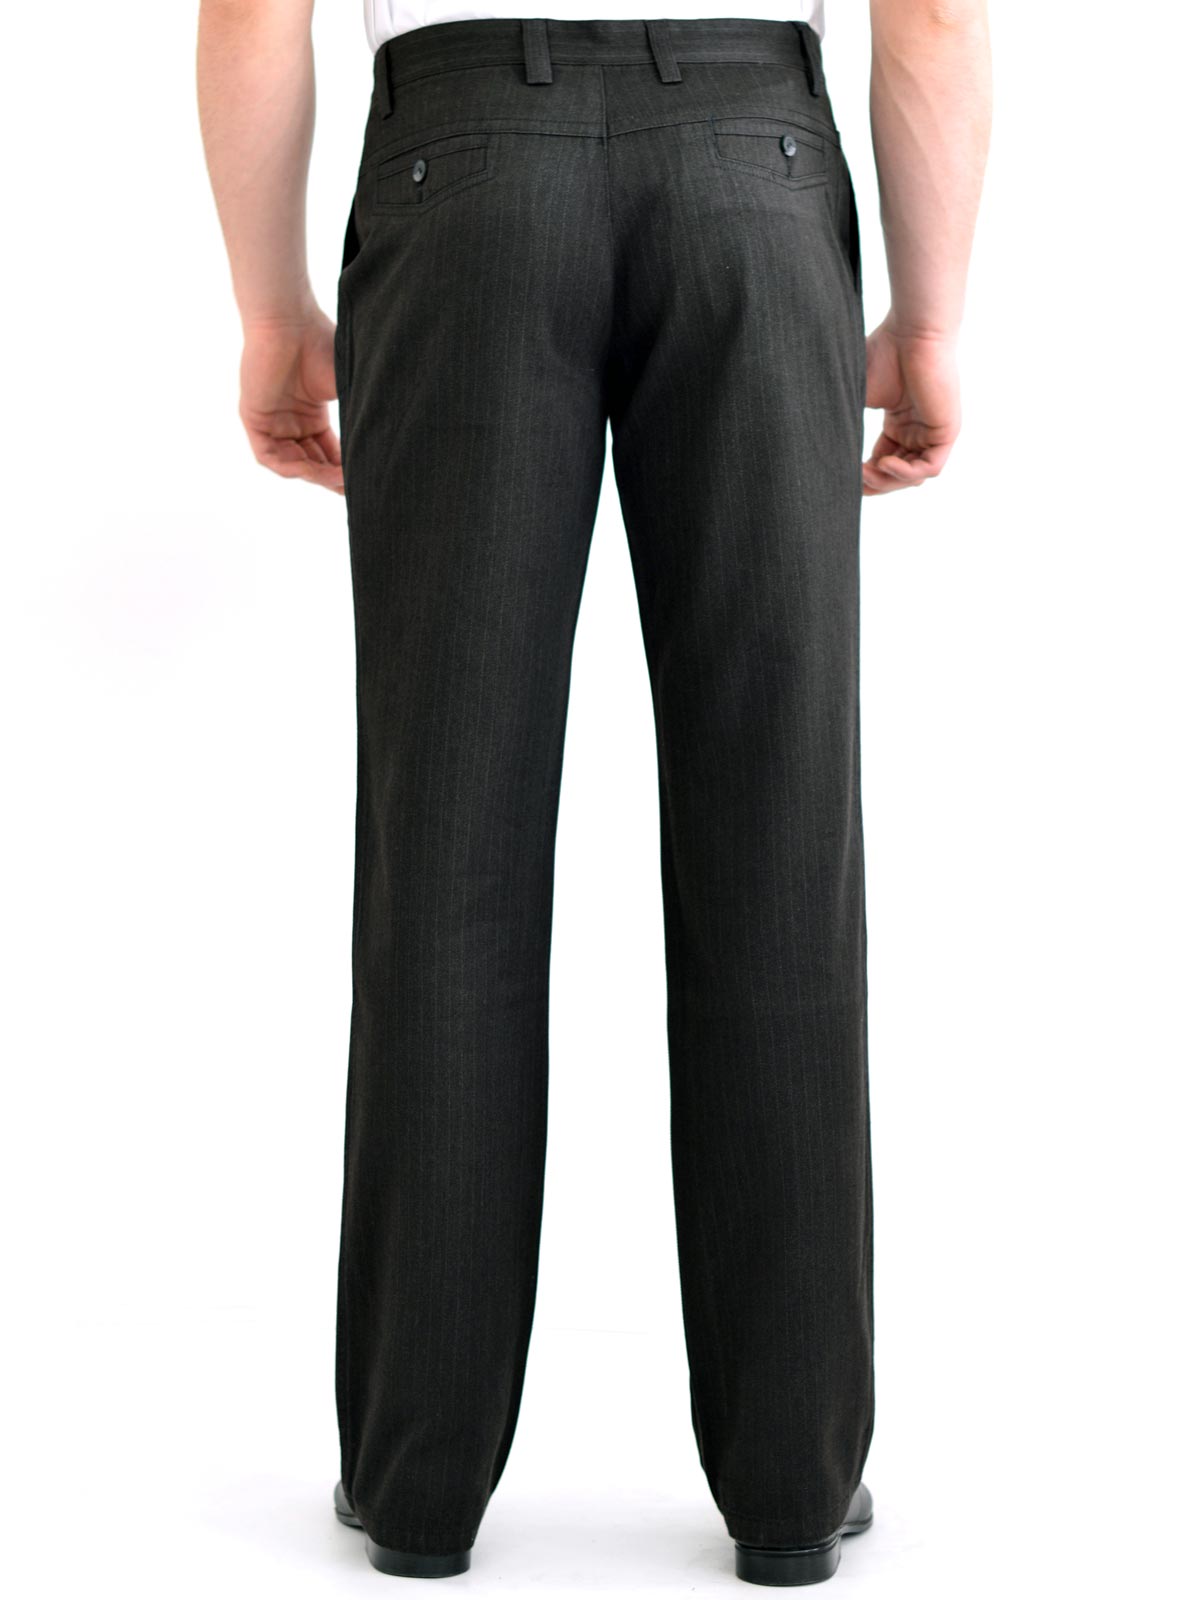 Striped trousers straight silhouette - 60104 € 11.25 img2